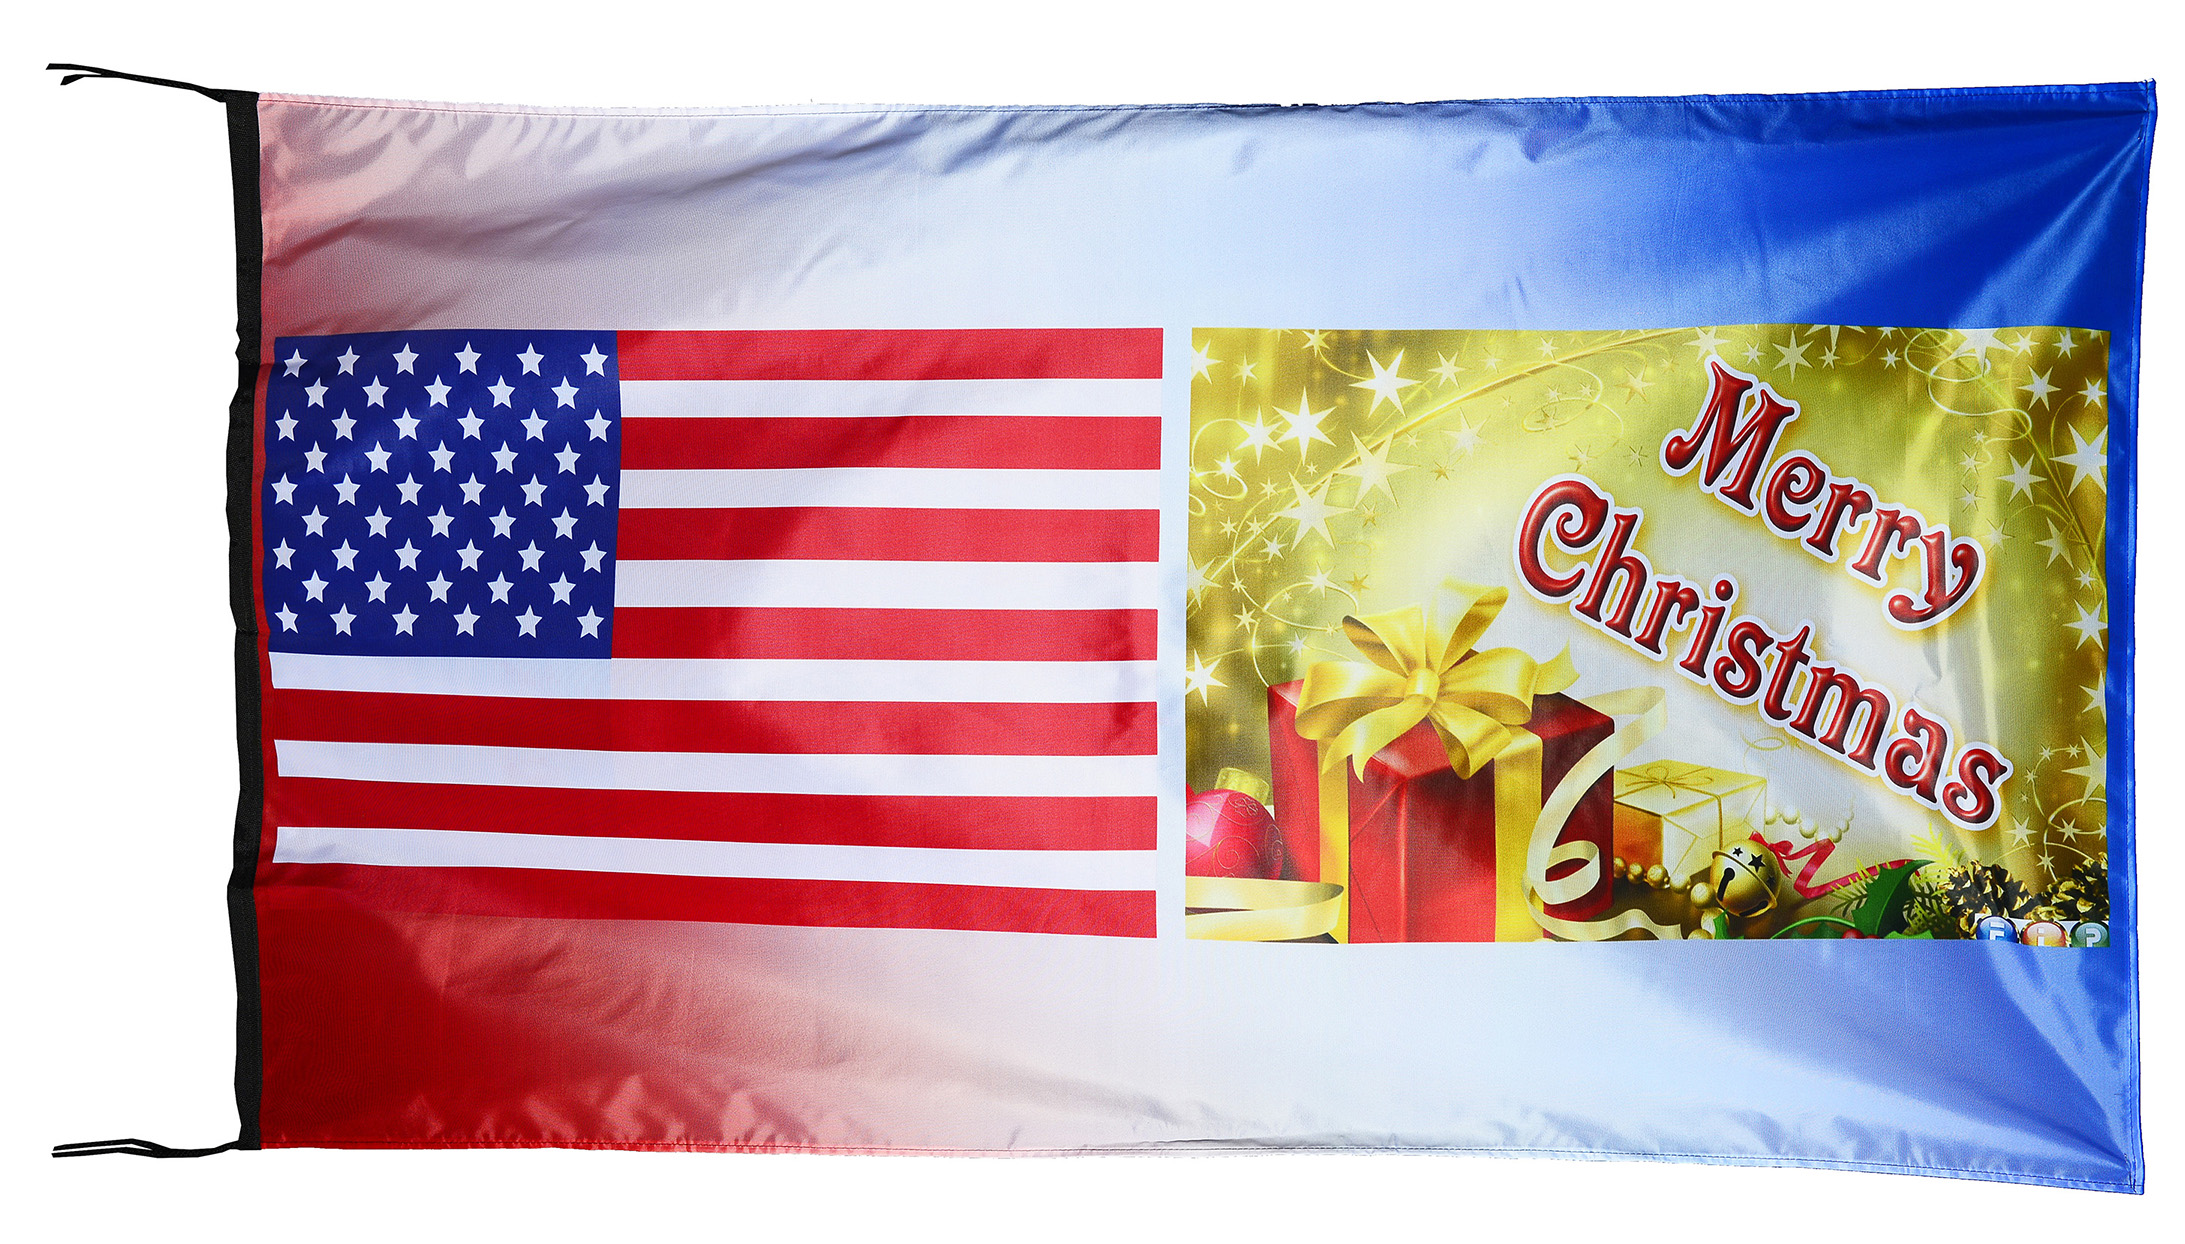 Flag  040 USA / US Country / United States Of America and Happy Xmas Merry Xmas / Christmas / Hollidays / Santa / Winter / Snow / Patriotic / Pride Hybrid Weather-Resistant Polyester Outdoor Flag Landscape Banner / Vivid Colors / 3 X 5 FT (150 x 90cm) International Flags for Sale